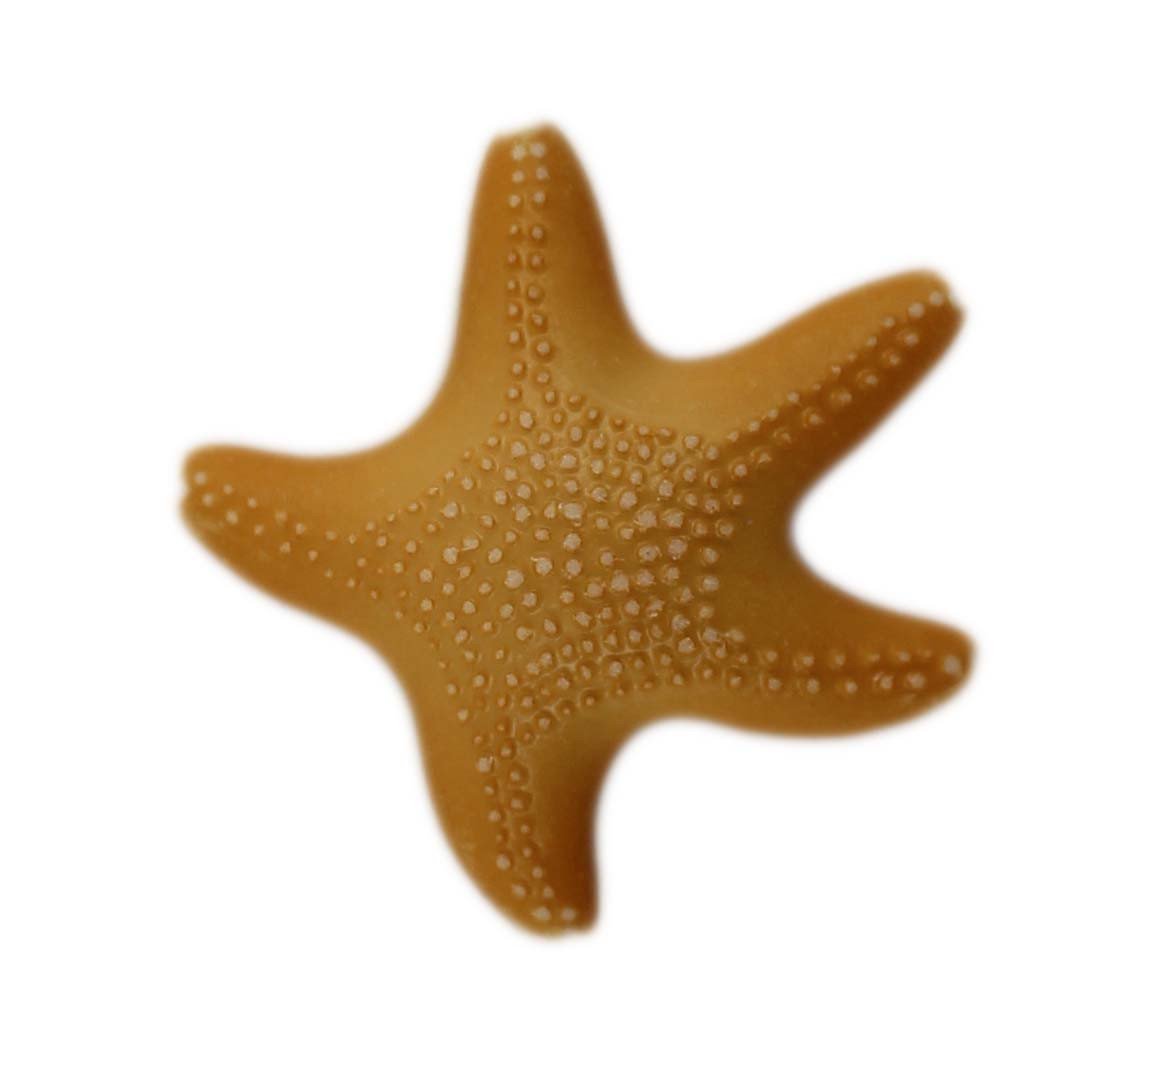 Starfish - Buttons Galore and More